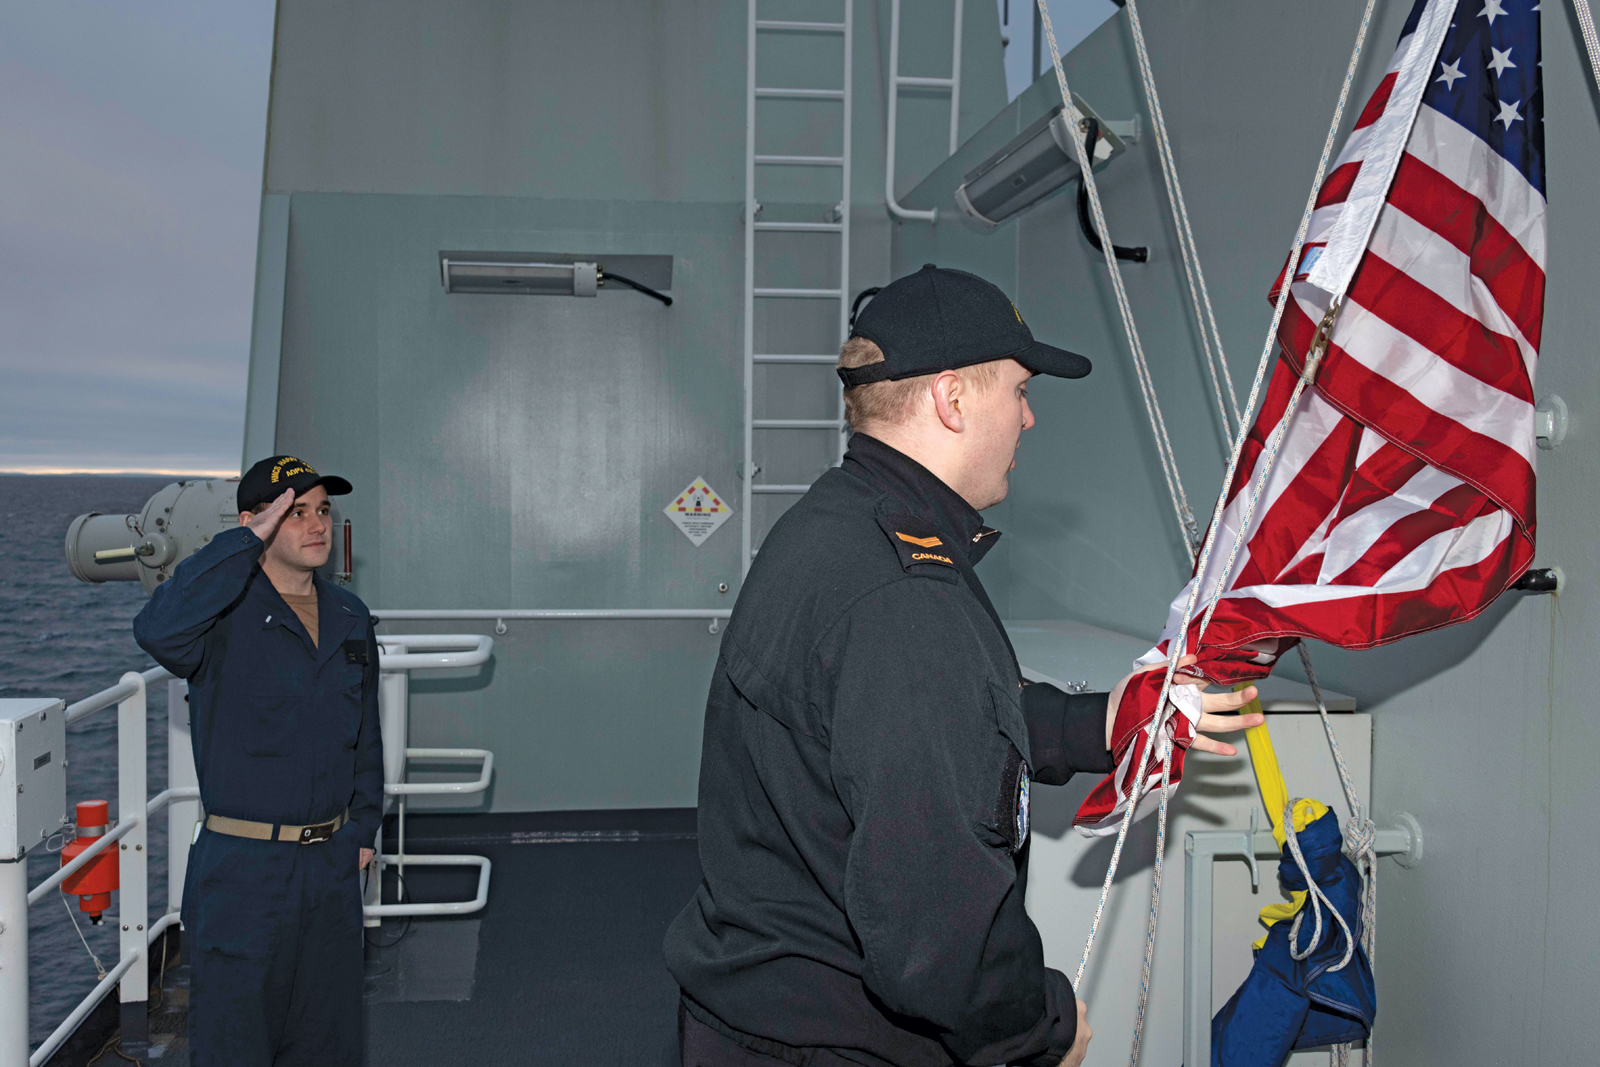 U.S. Navy sailor Lieutenant Junior Grade Kyle Luchau and an HMCS Harry DeWolf crewmember raise the United States flag in commemoration of 9/11. 